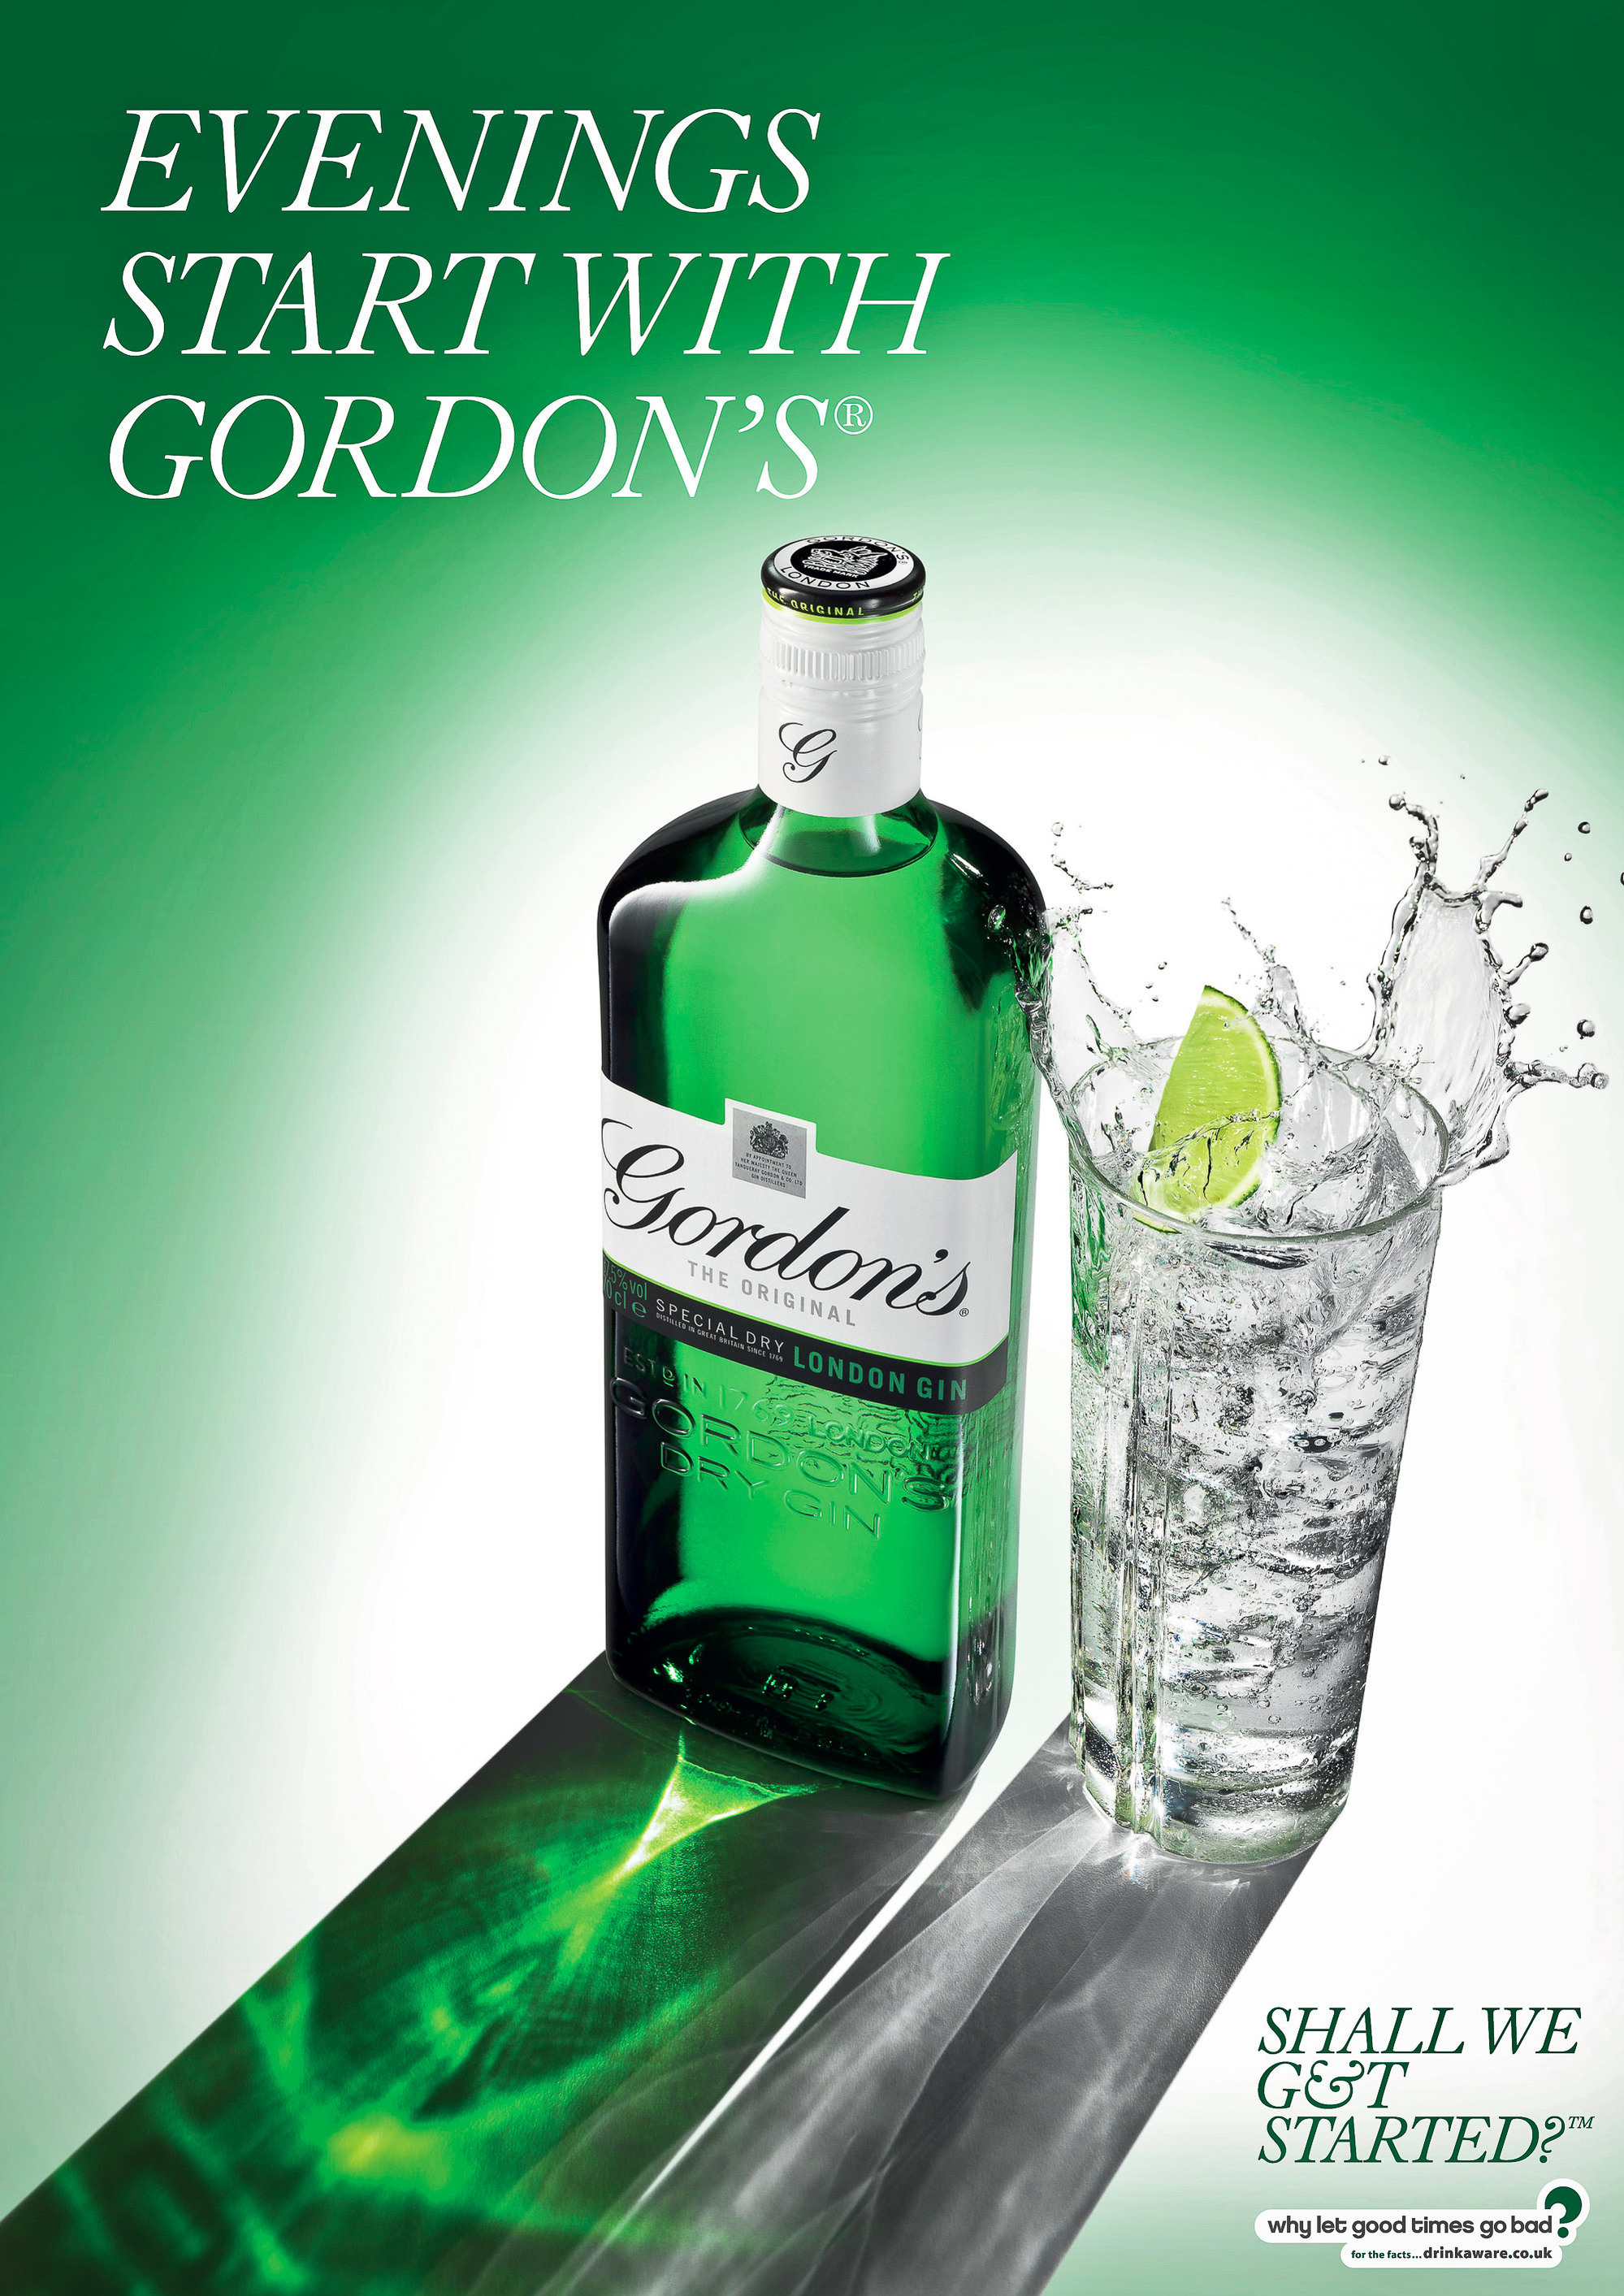 Gordon's gin bottle splash beverage campaign Photography by commercial, product & advertising photographer Timothy Hogan in studio Los Angeles